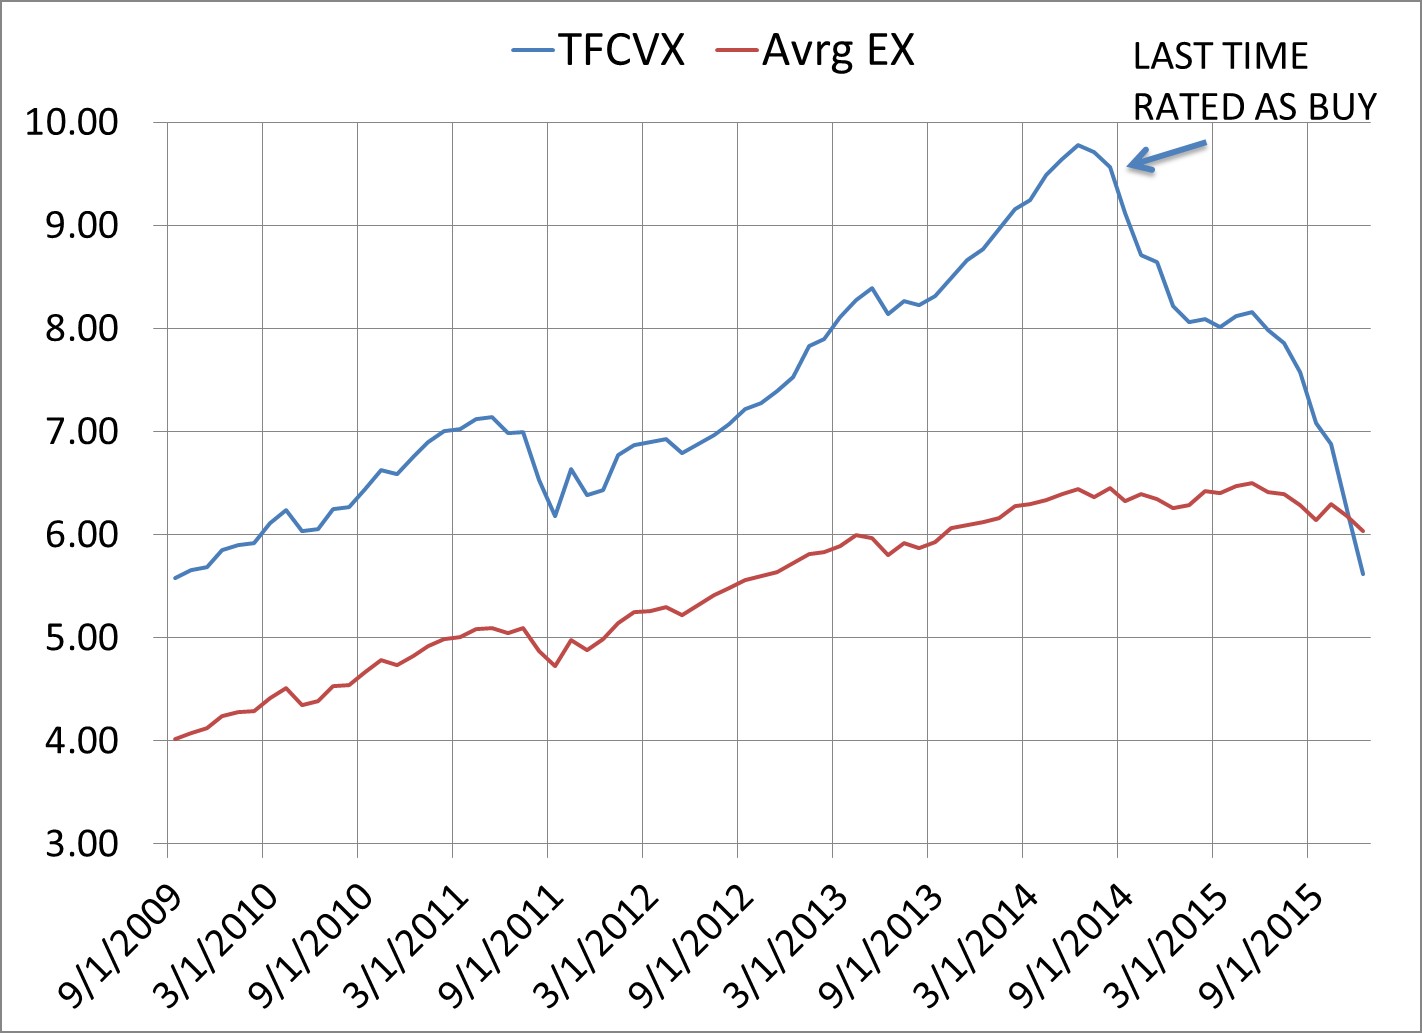 This chart shows the comparison between TFCVX (blue line) and an average of 29 high-yield funds, excluding TFCVX (Avrg EX red line).